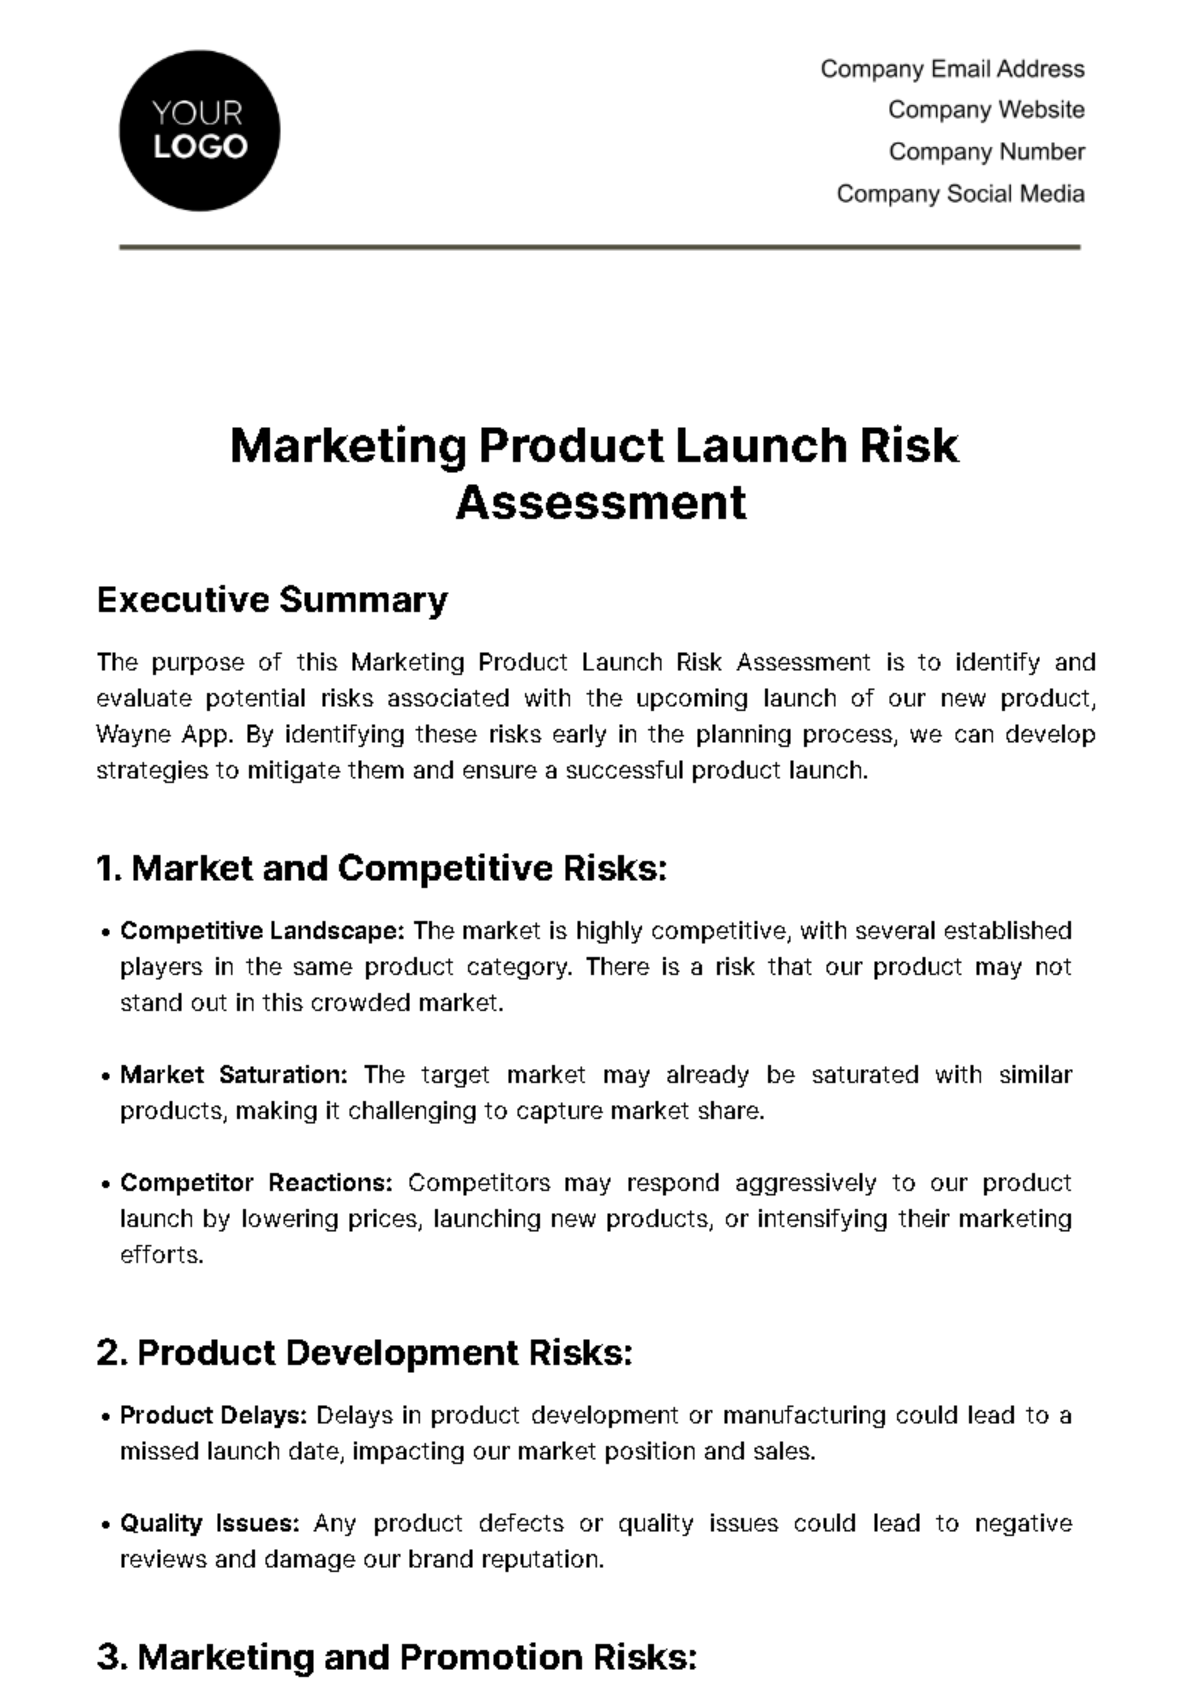 Free Marketing Product Launch Risk Assessment Template